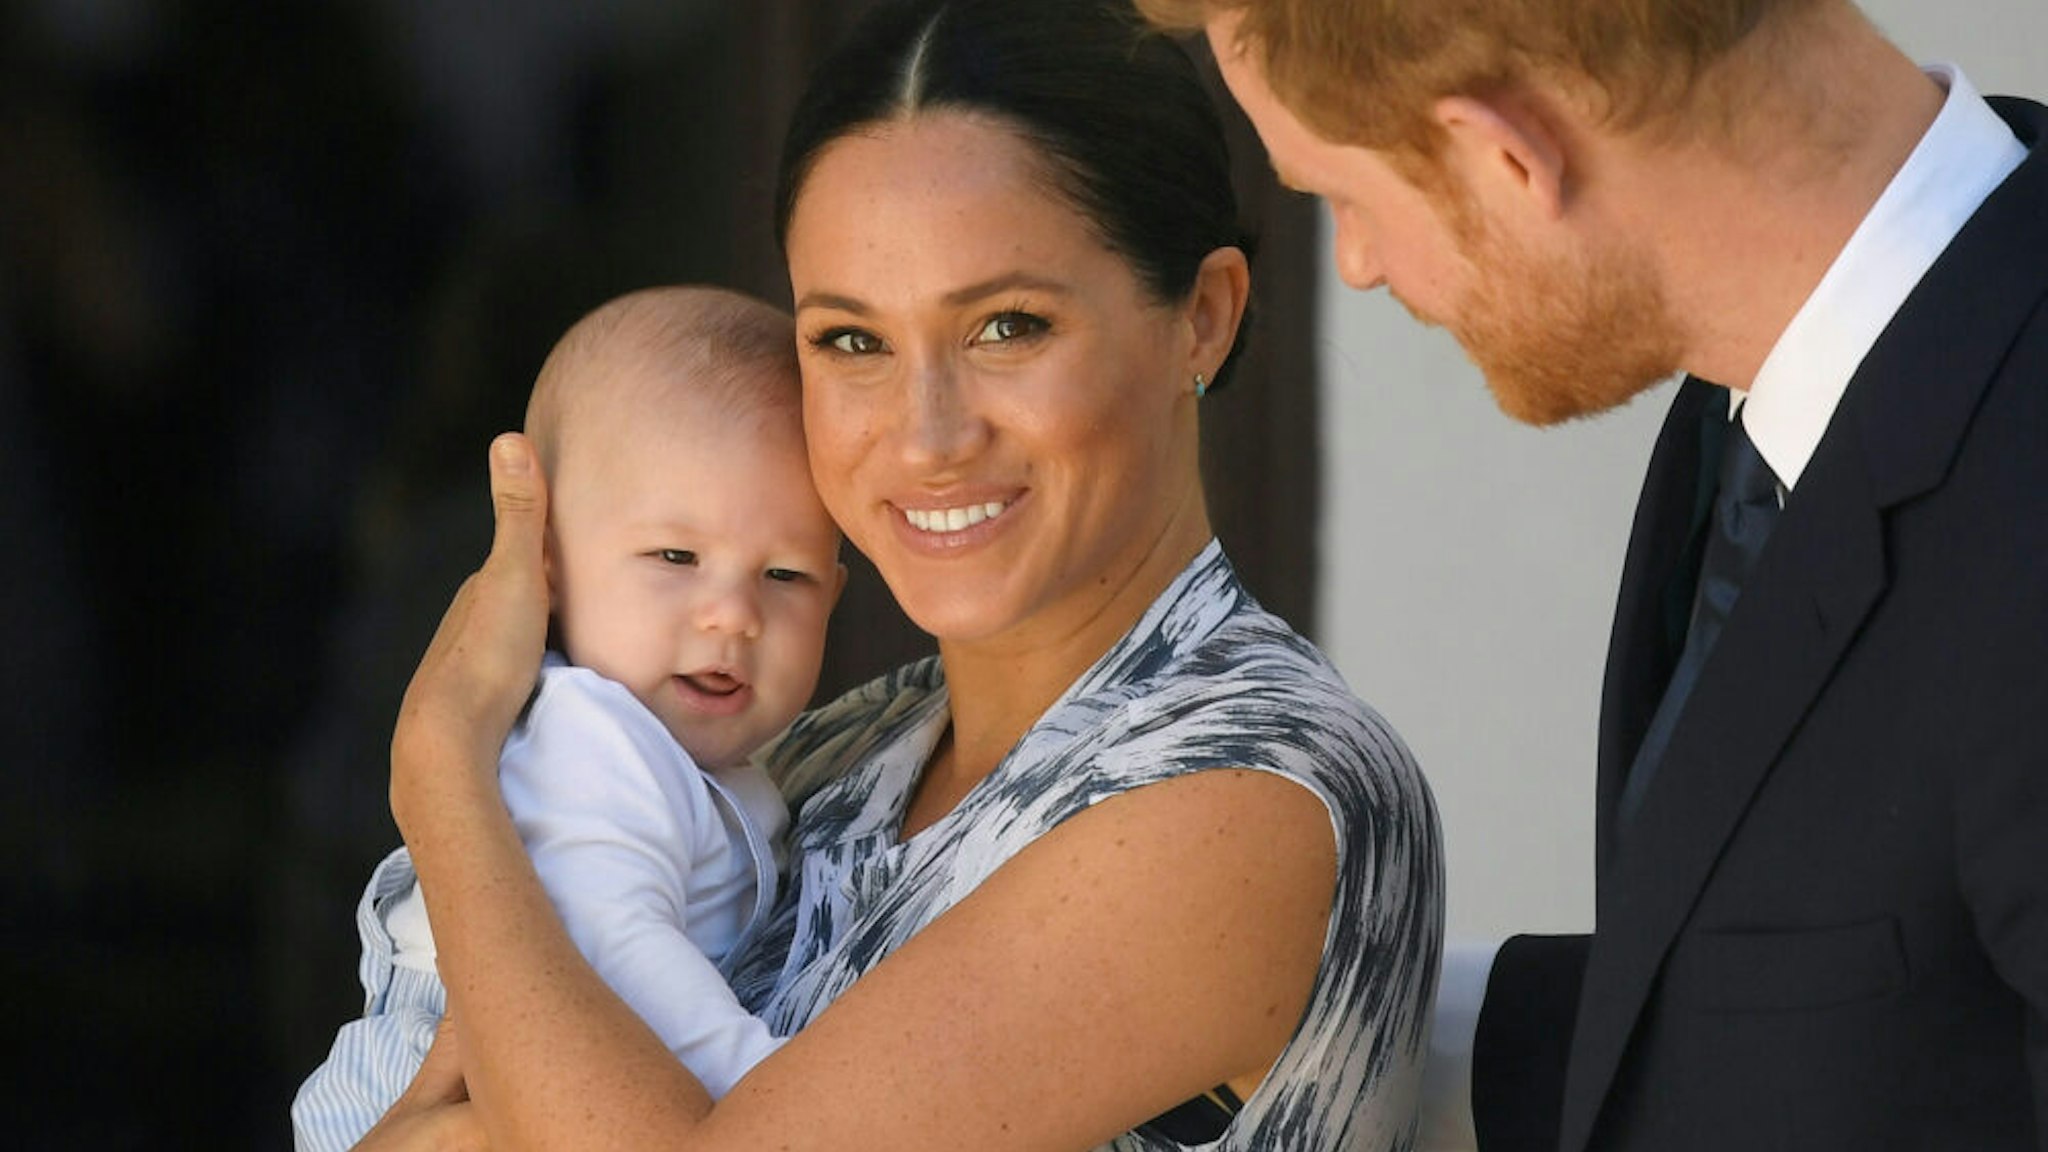 CAPE TOWN, SOUTH AFRICA - SEPTEMBER 25: Prince Harry, Duke of Sussex and Meghan, Duchess of Sussex and their baby son Archie Mountbatten-Windsor at a meeting with Archbishop Desmond Tutu at the Desmond &amp; Leah Tutu Legacy Foundation during their royal tour of South Africa on September 25, 2019 in Cape Town, South Africa.